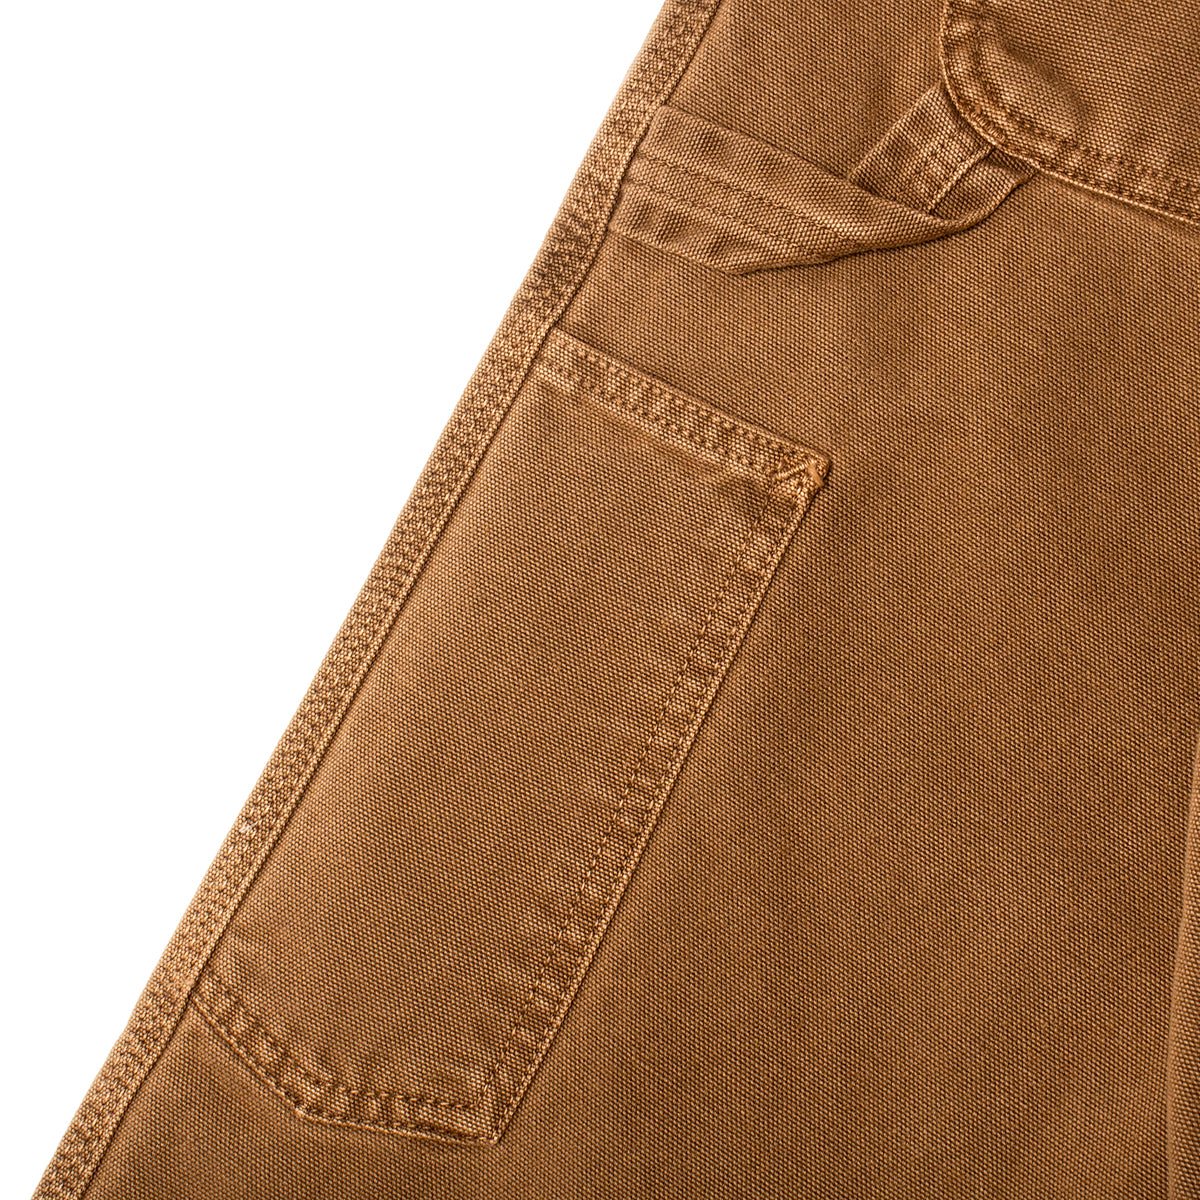 Carhartt WIP | Single Knee Pant Style # I026463-1CNFH Color : Tamarind (Faded)